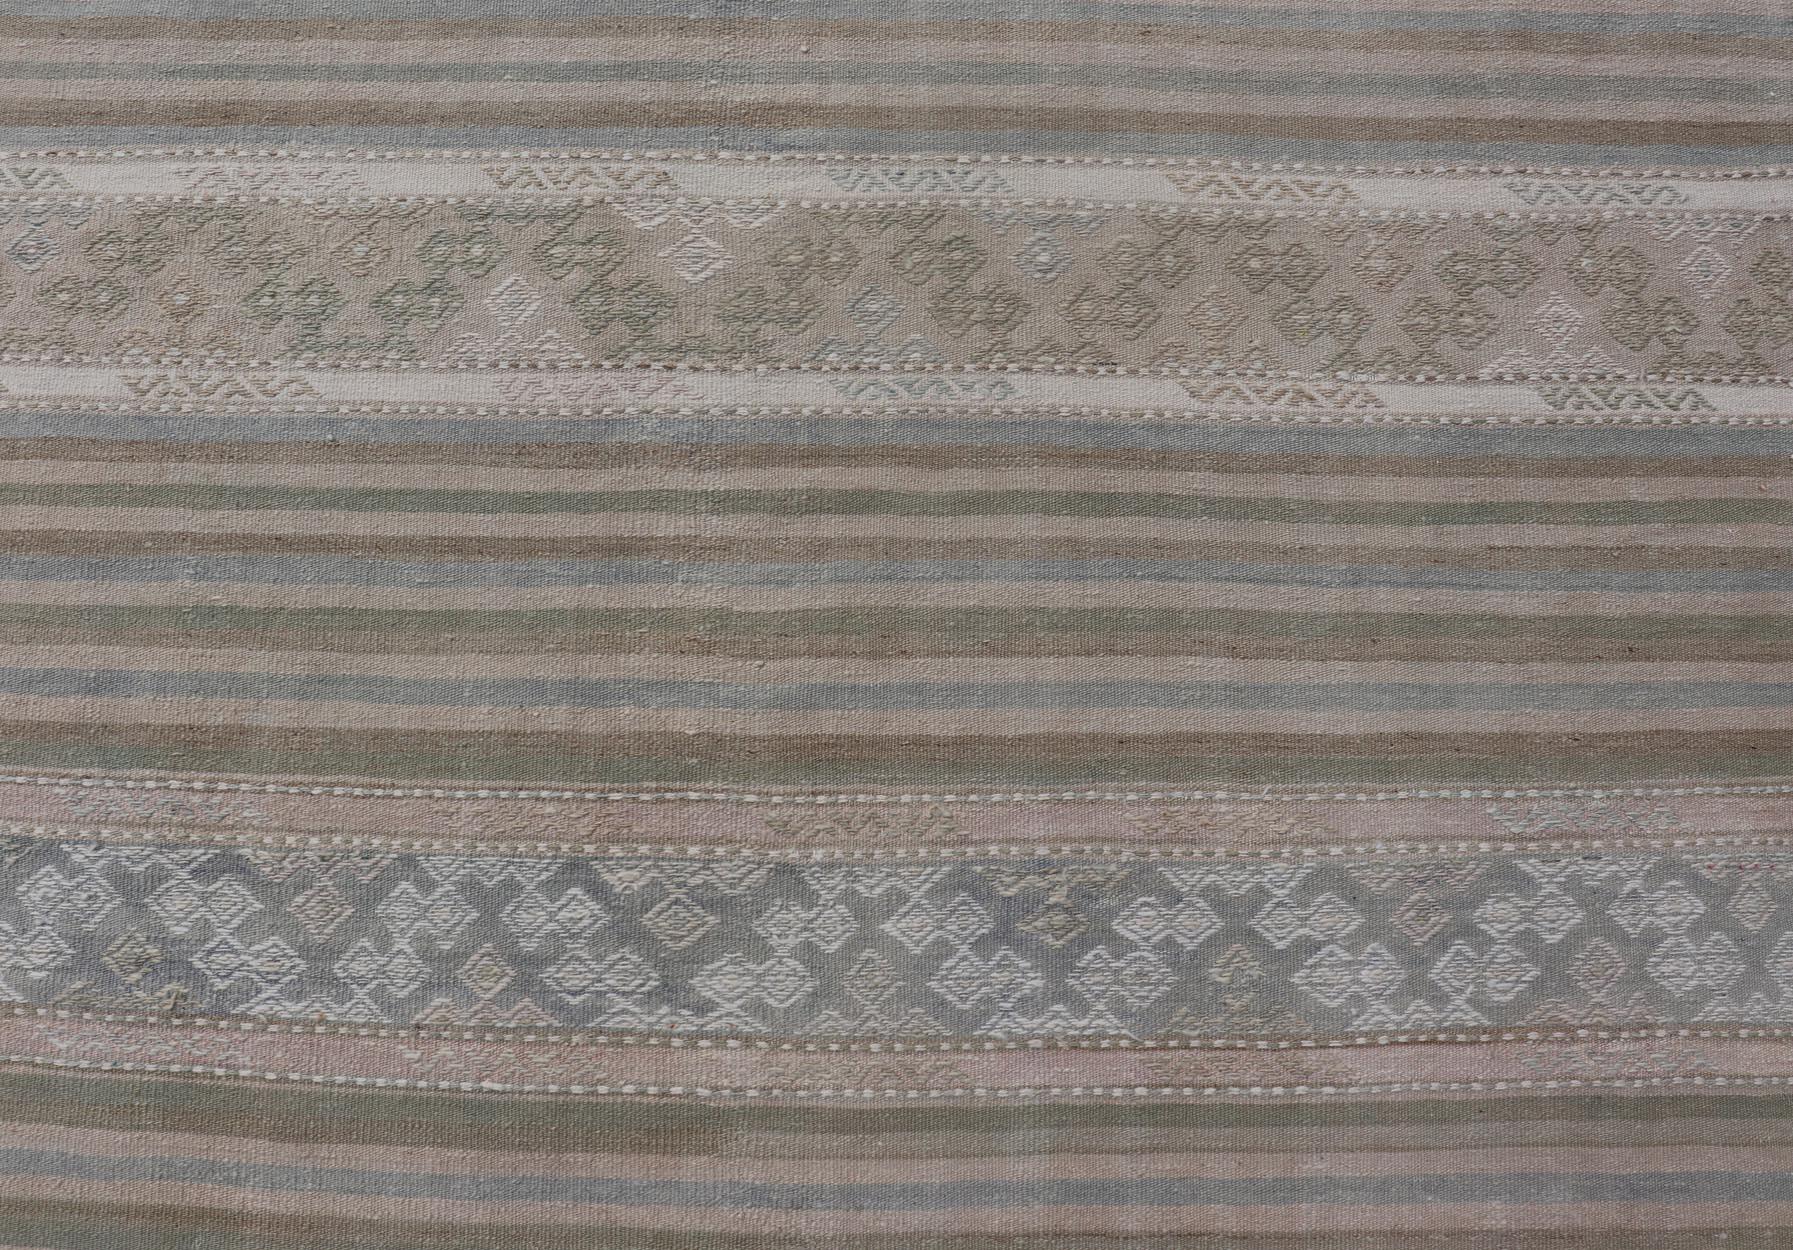 20th Century Turkish Gallery Flat-Weave Kilim in Muted Colors with Stripes and Embroideries For Sale